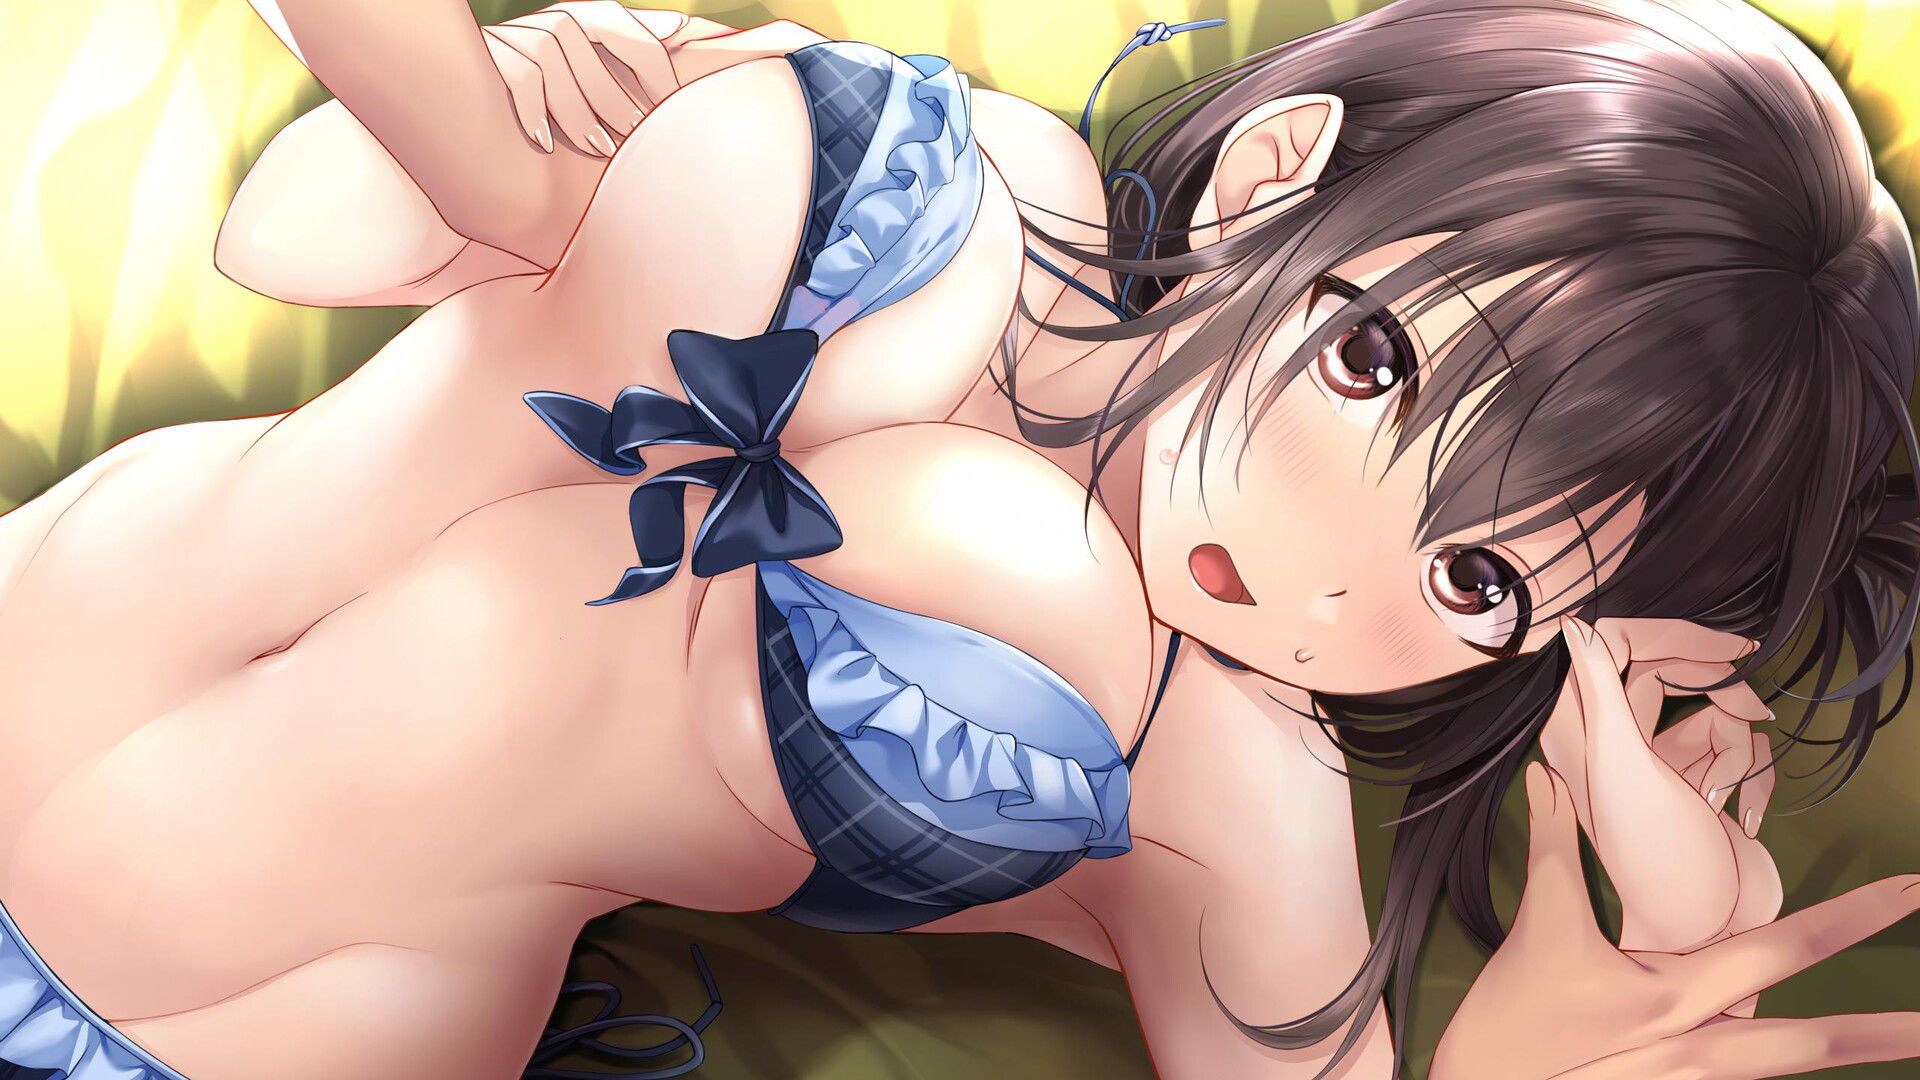 PS4 / switch version [Aikis 2] erotic event CG such as girl's skirt raise and swimsuit 10